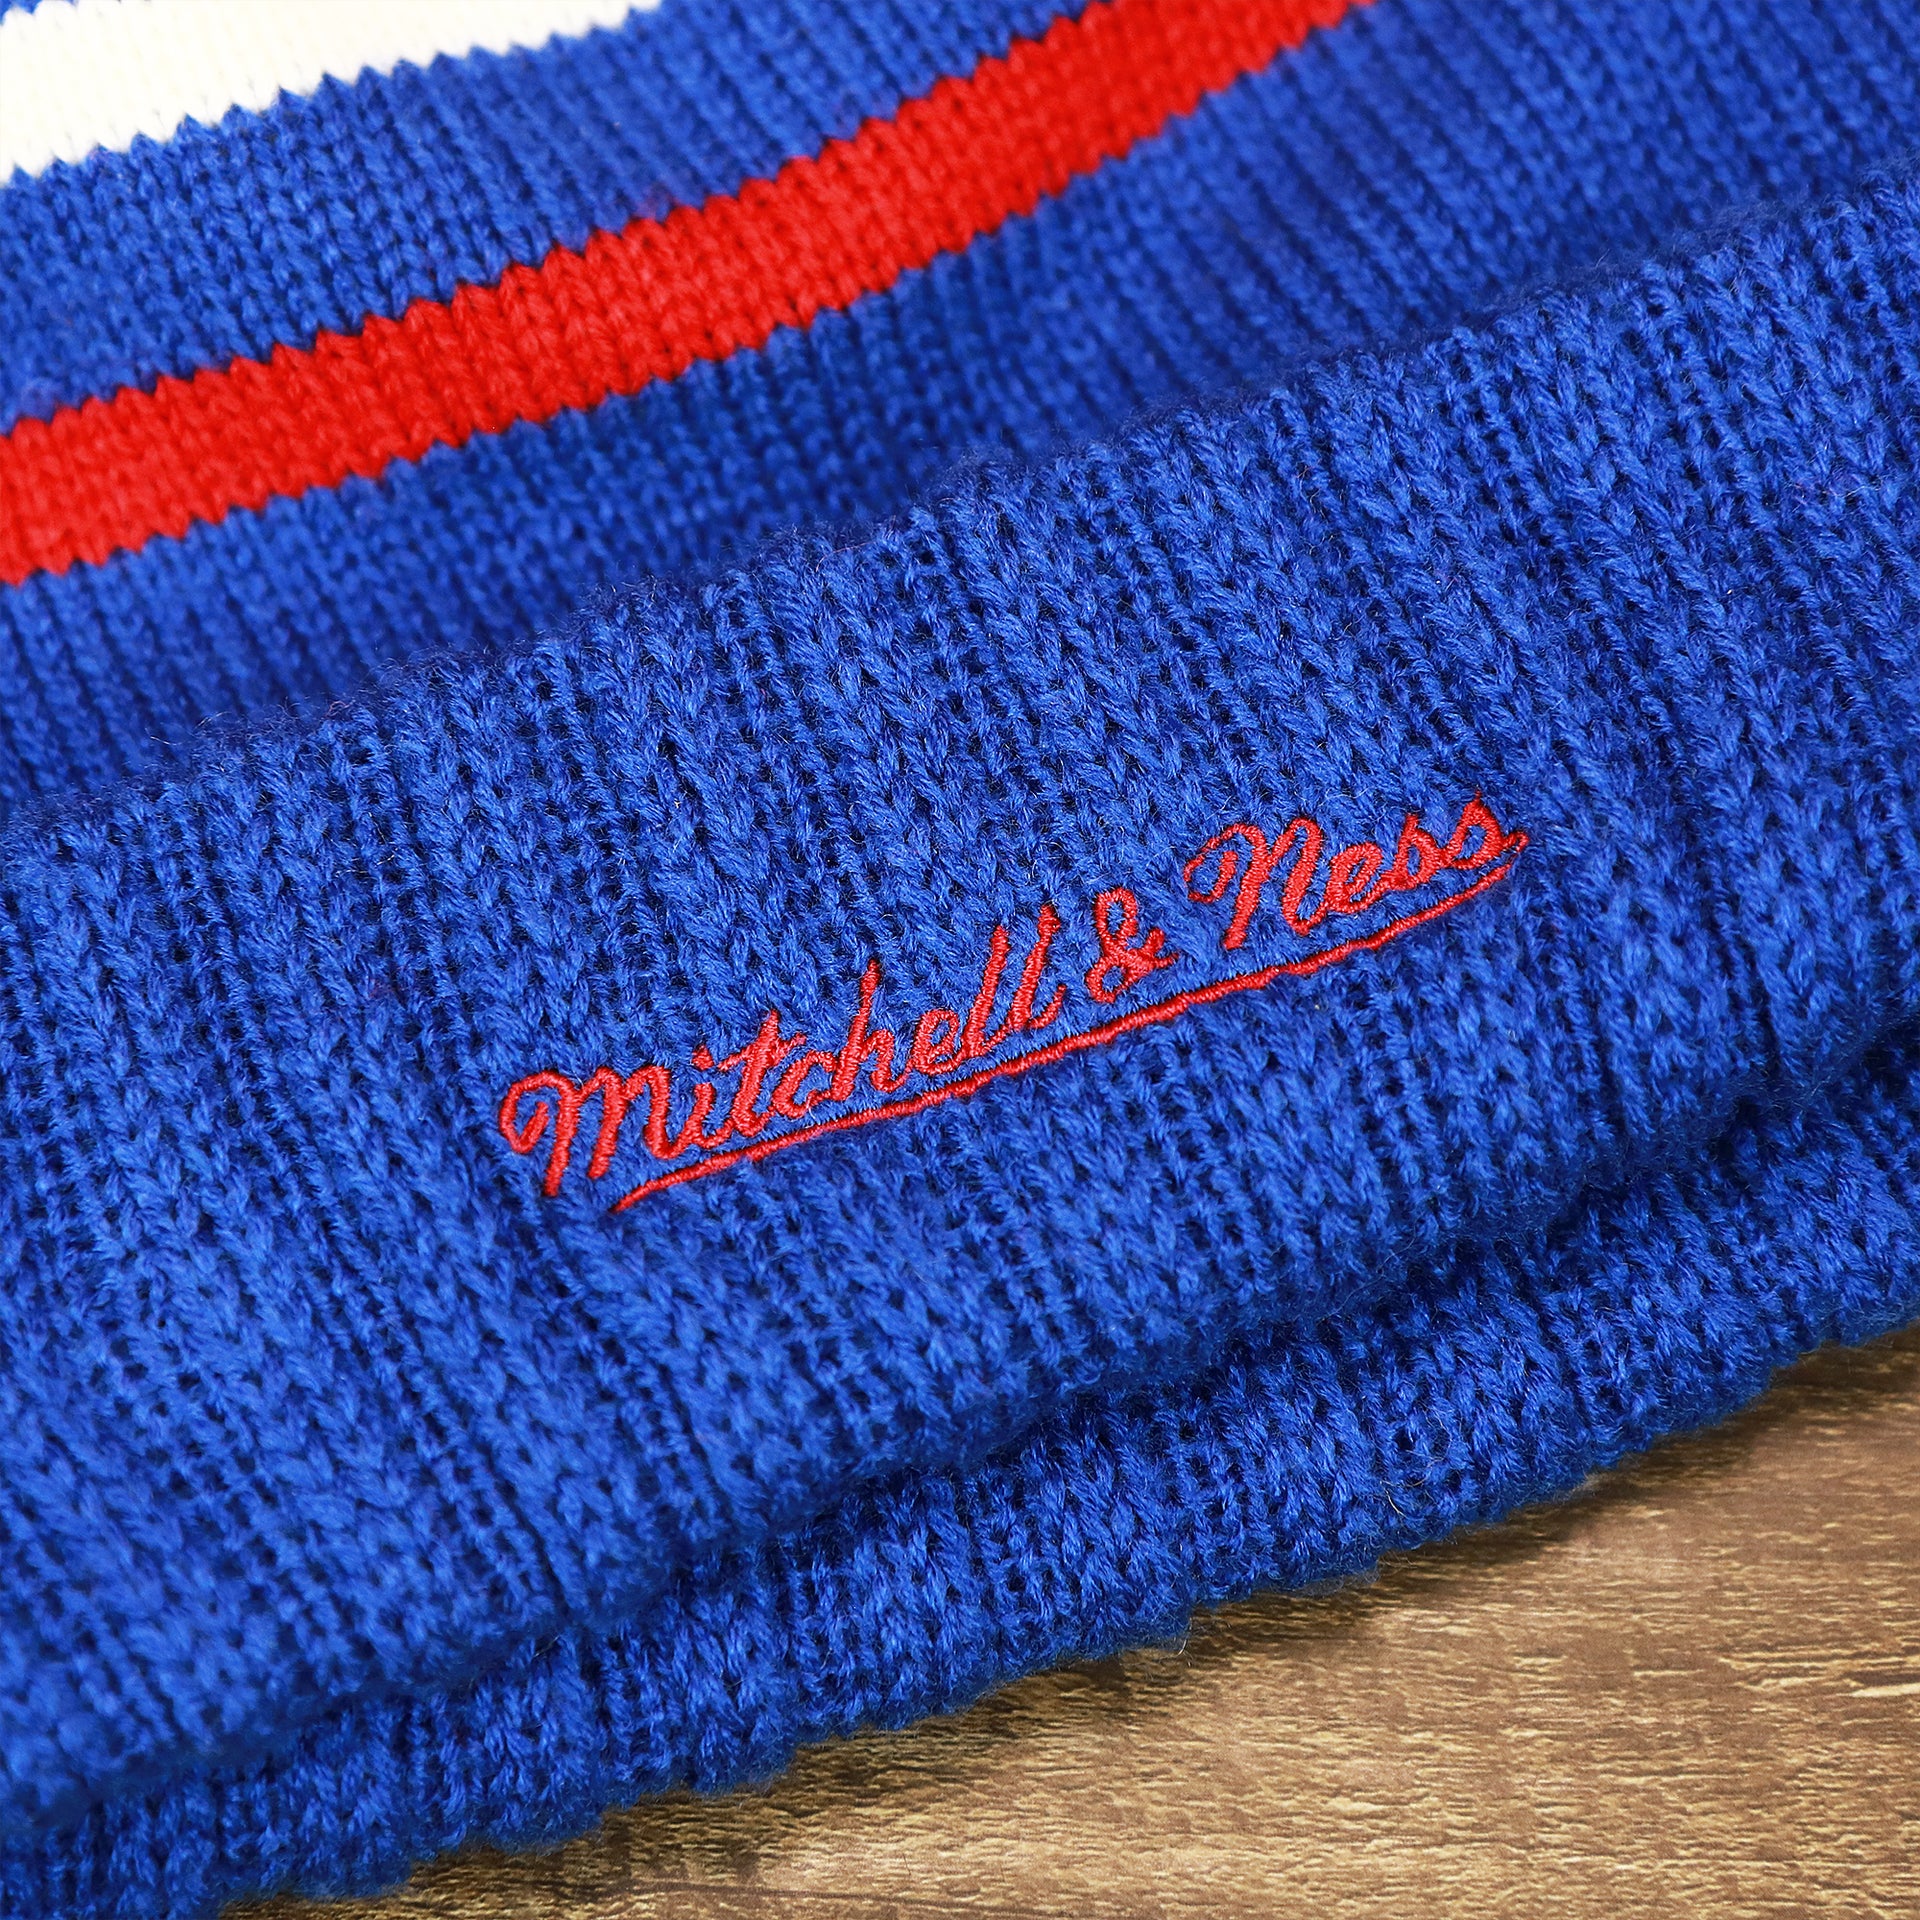 The Mitchell And Ness Script Logo on the Los Angeles Clippers Cursive Wordmark Blue Cuff Pom Pom Winter Beanie | Blue Striped Winter Beanie